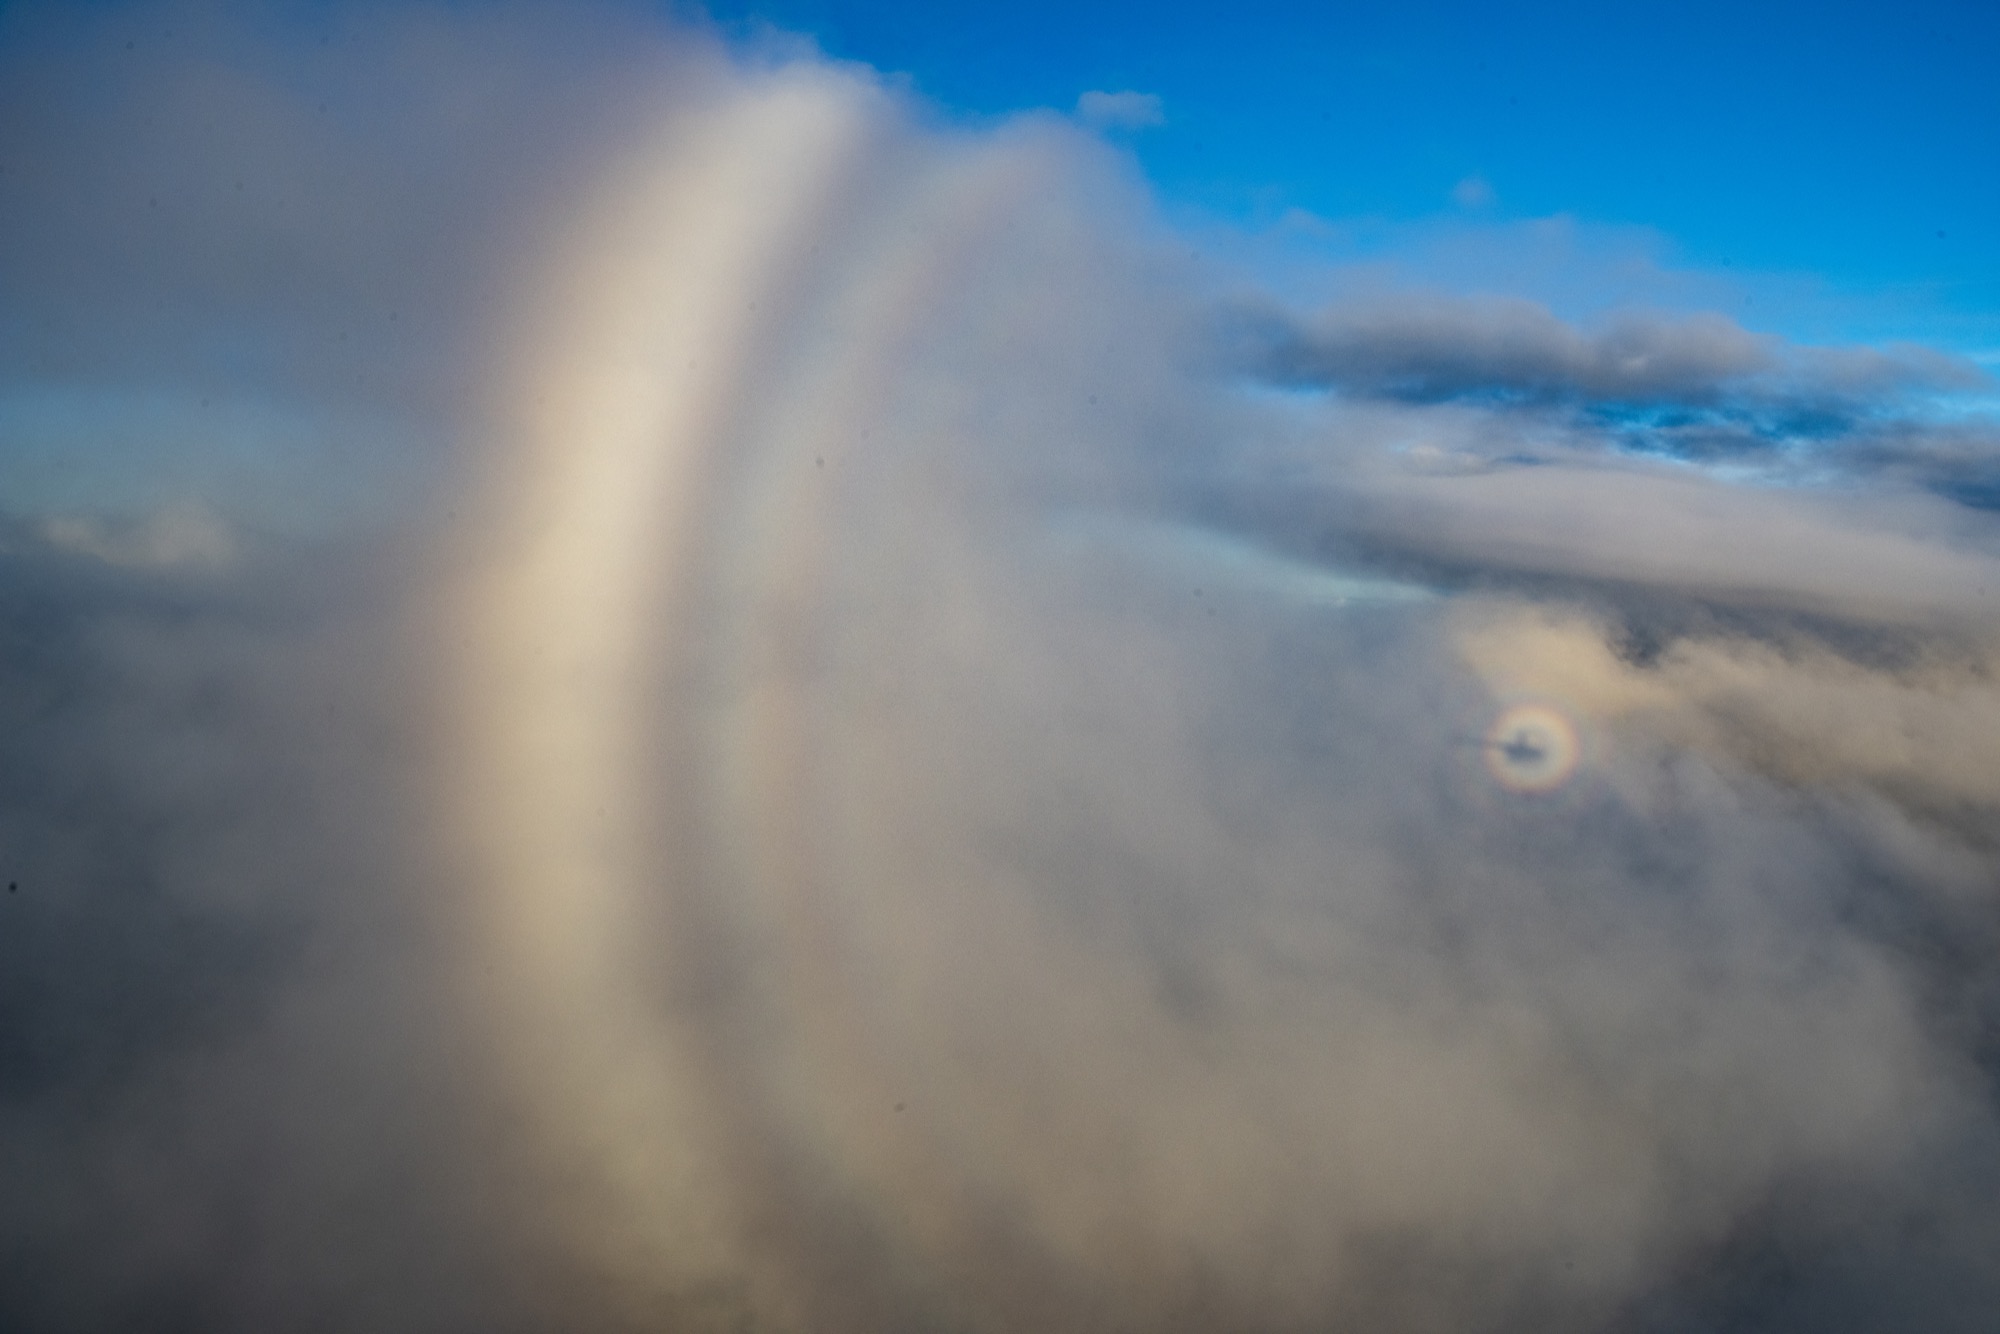 a photo taken from a helicopter. in the distance you can see the shadow of the helicopter against the clouds, around the shadow is a glowing circular rainbow ring. to the left is another partial curve that is a cloud bow